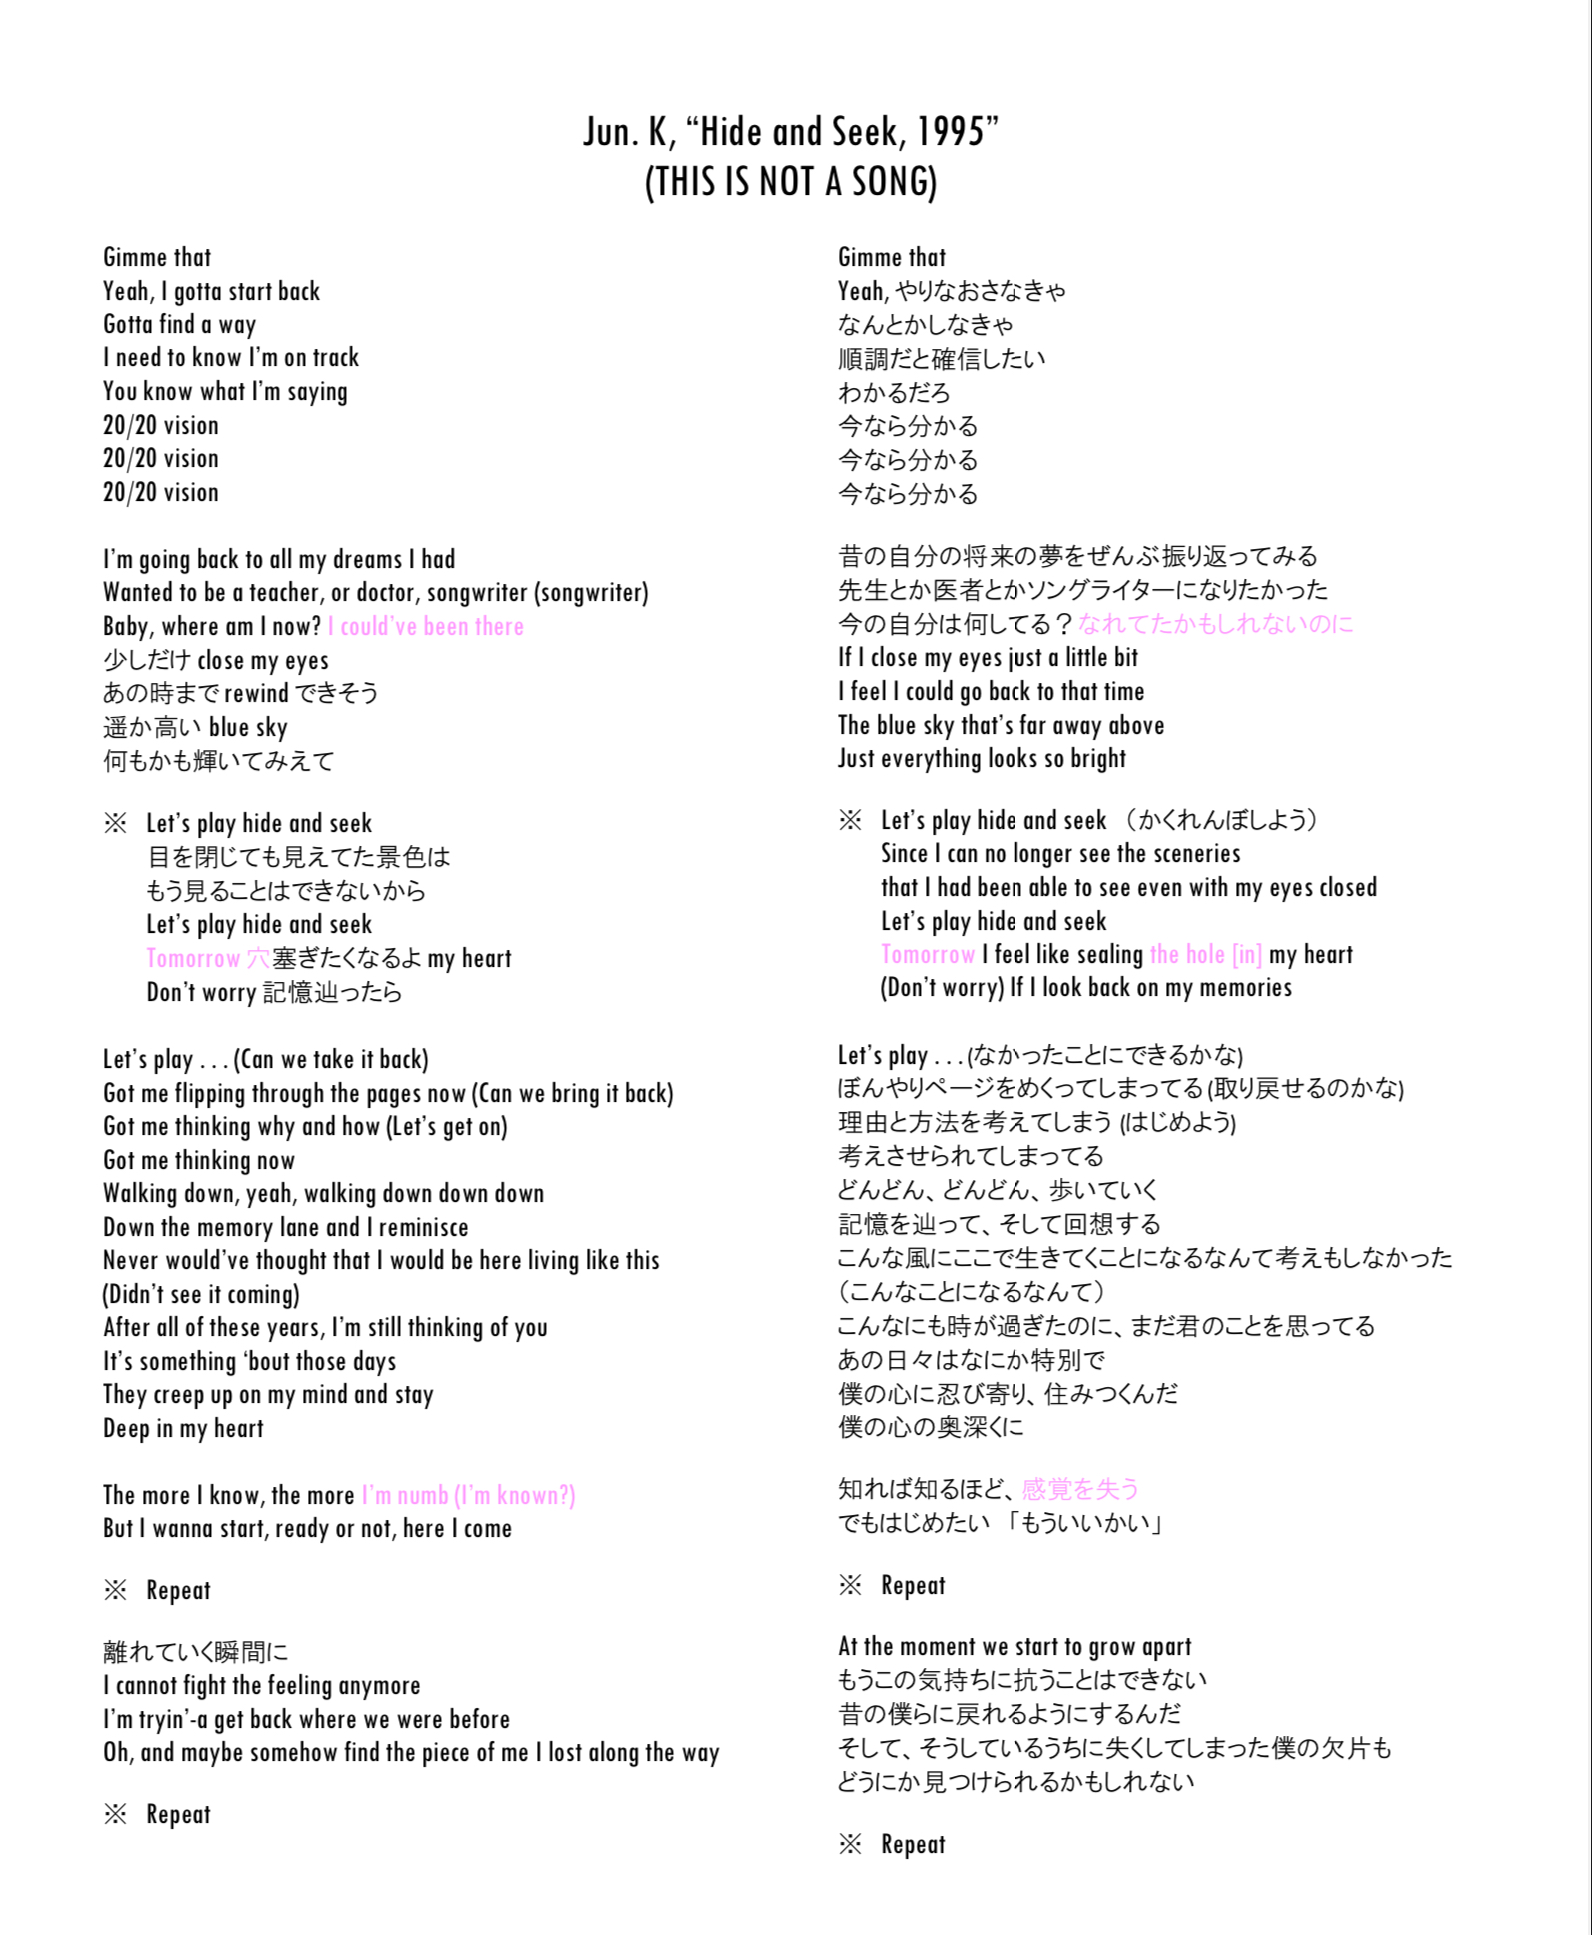 Hide And Seek Lyrics albanglian on X: "Jun. K, "Hide and Seek, 1995" (THIS IS NOT A SONG) Lyrics  (with EN ↔ JP translations) (NOT 100% accurate: Especially unsure of the  parts in pink) #Jun_K_1988 #Jun_K #